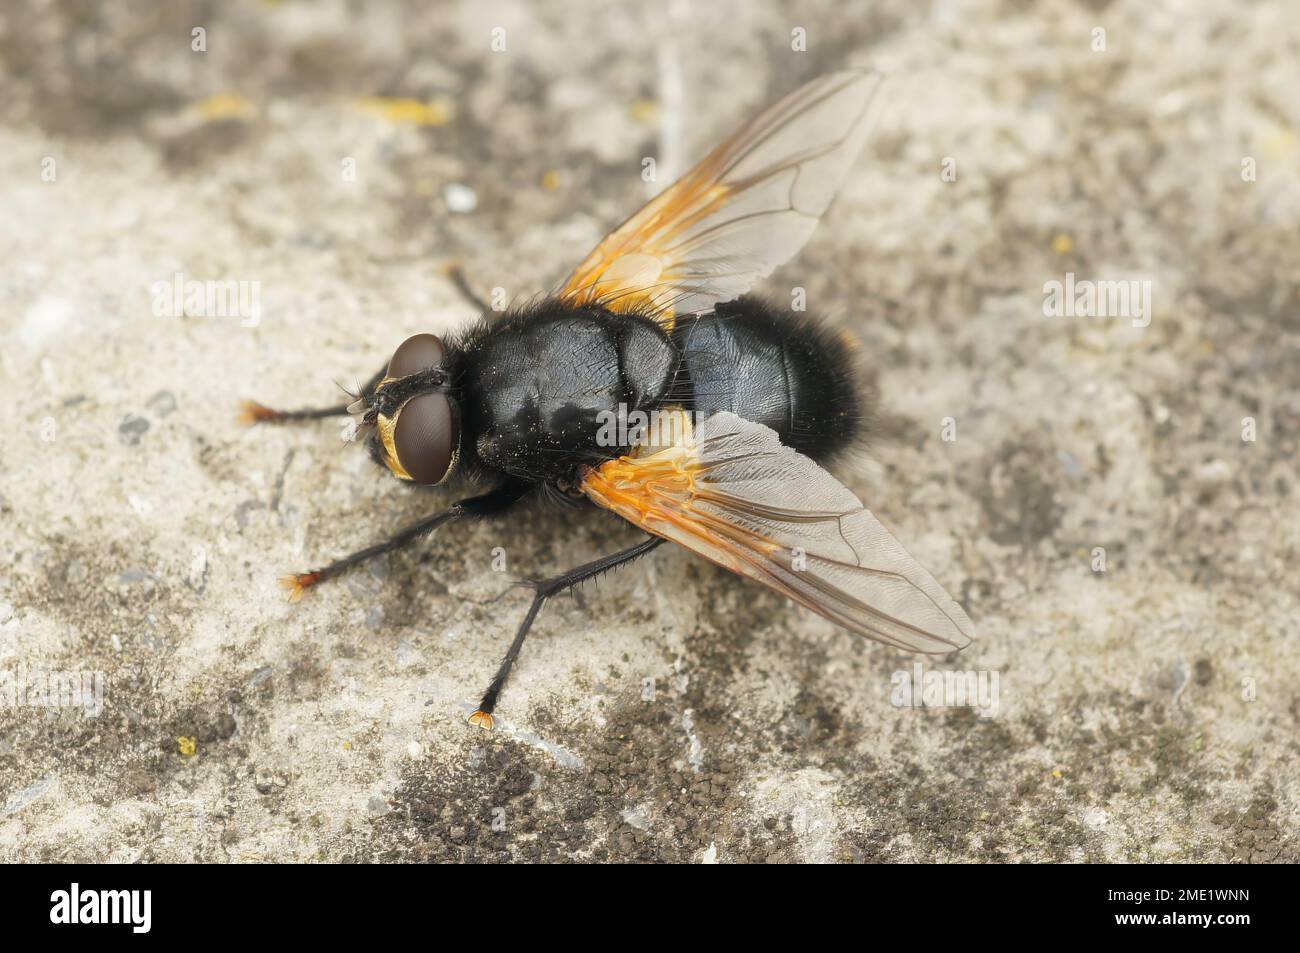 Detailed closeup on a black and orange Noonday fly, Mesembrina meridiana sitting on the ground Stock Photo